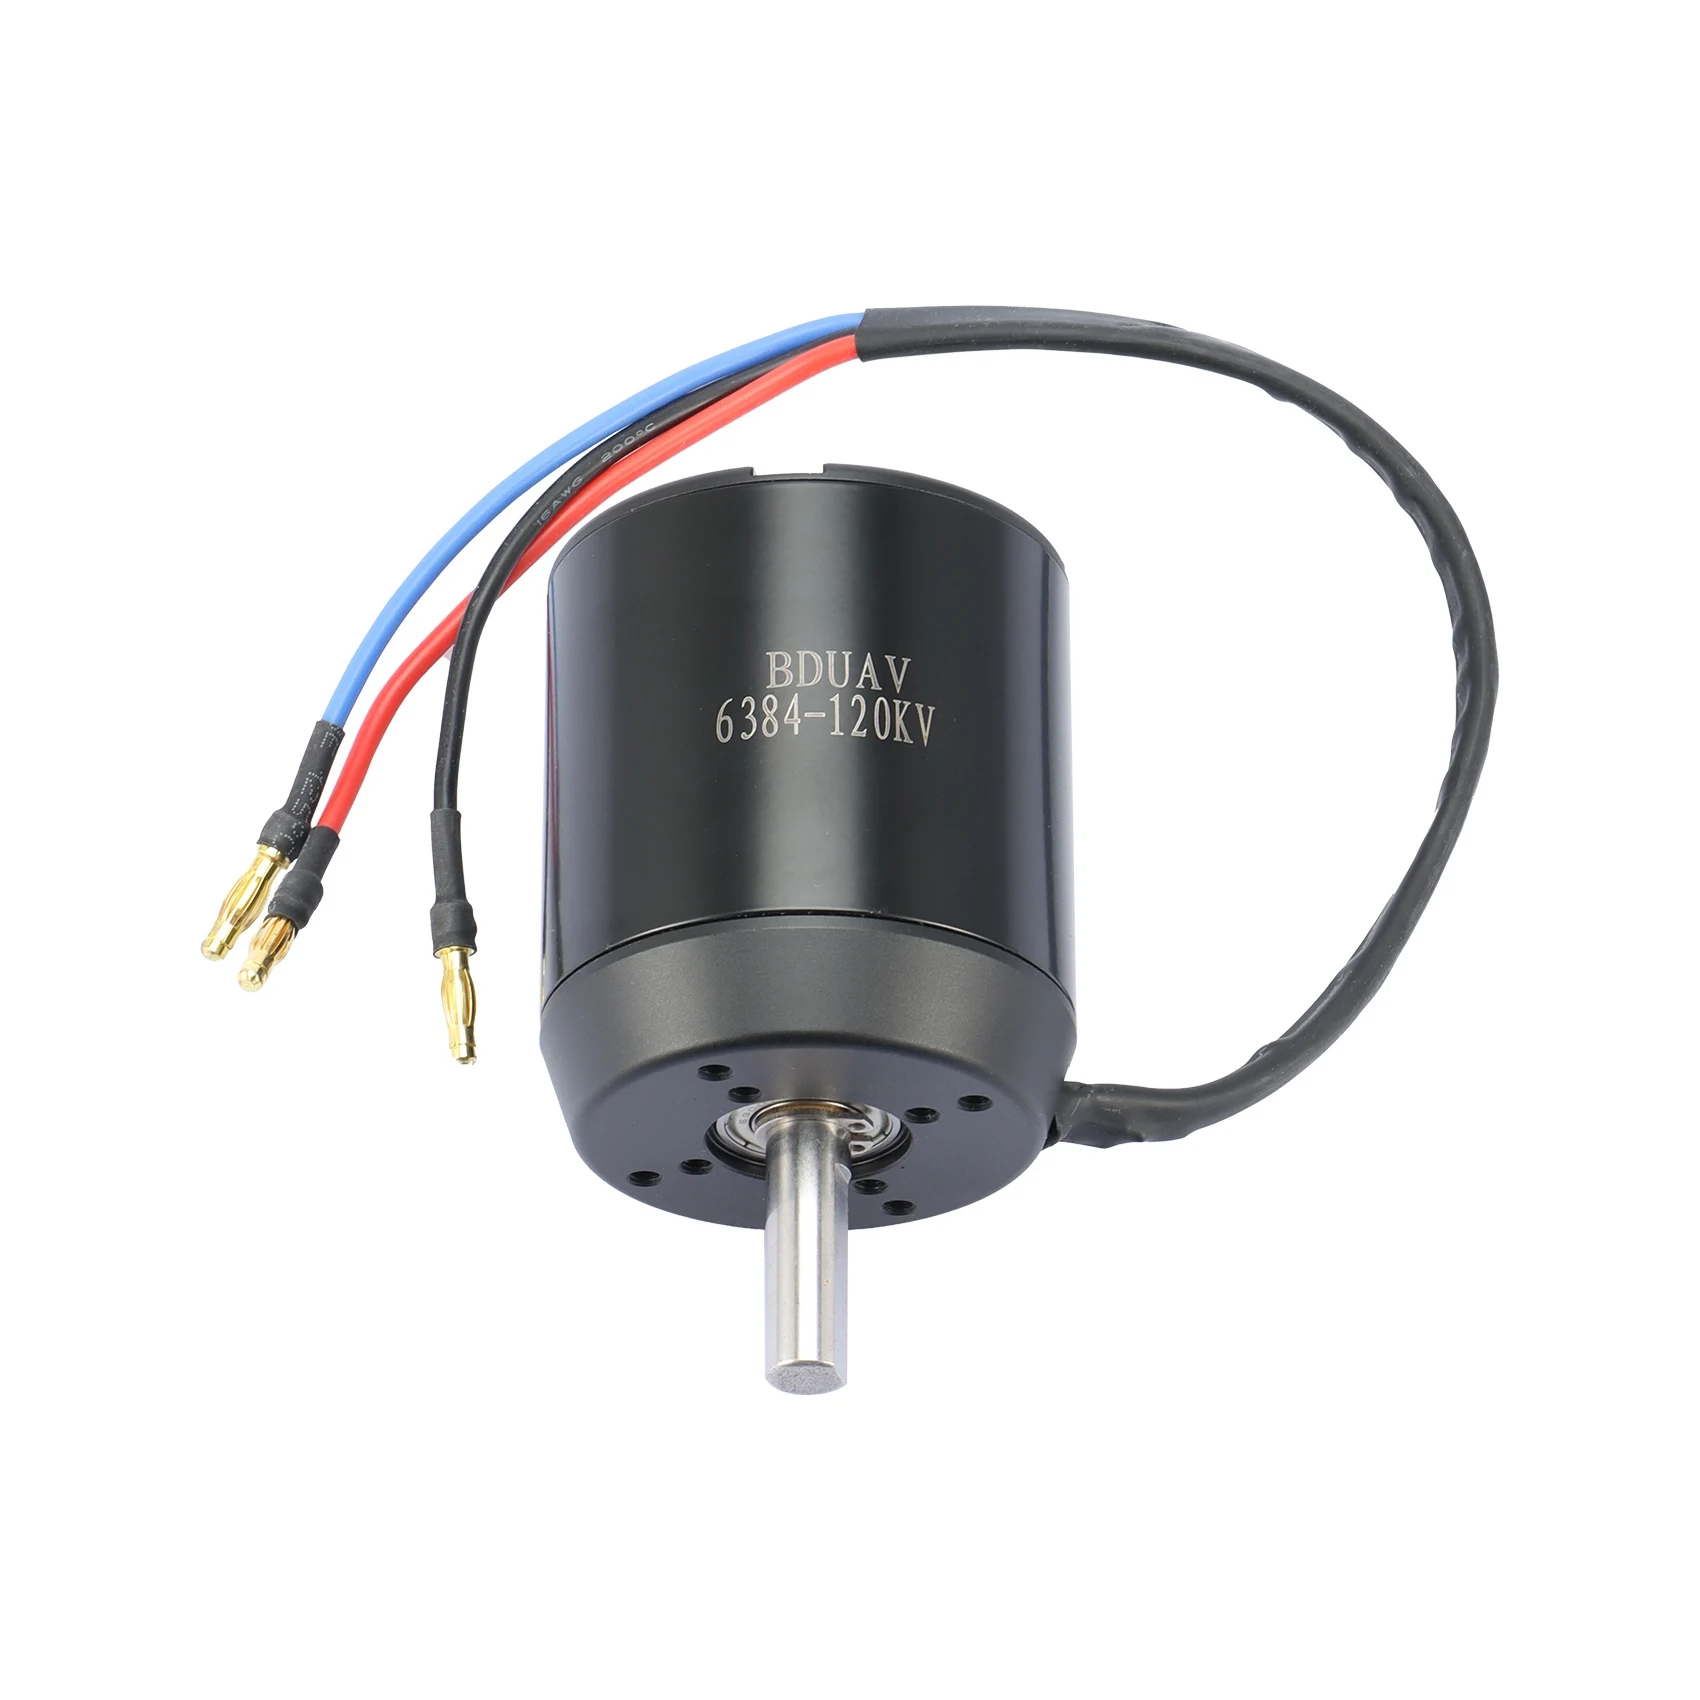 6384 120KV High Power BLDC Brushless Motor for Electric Balancing Scooter Skateboard Replacement Parts(Sensorless)